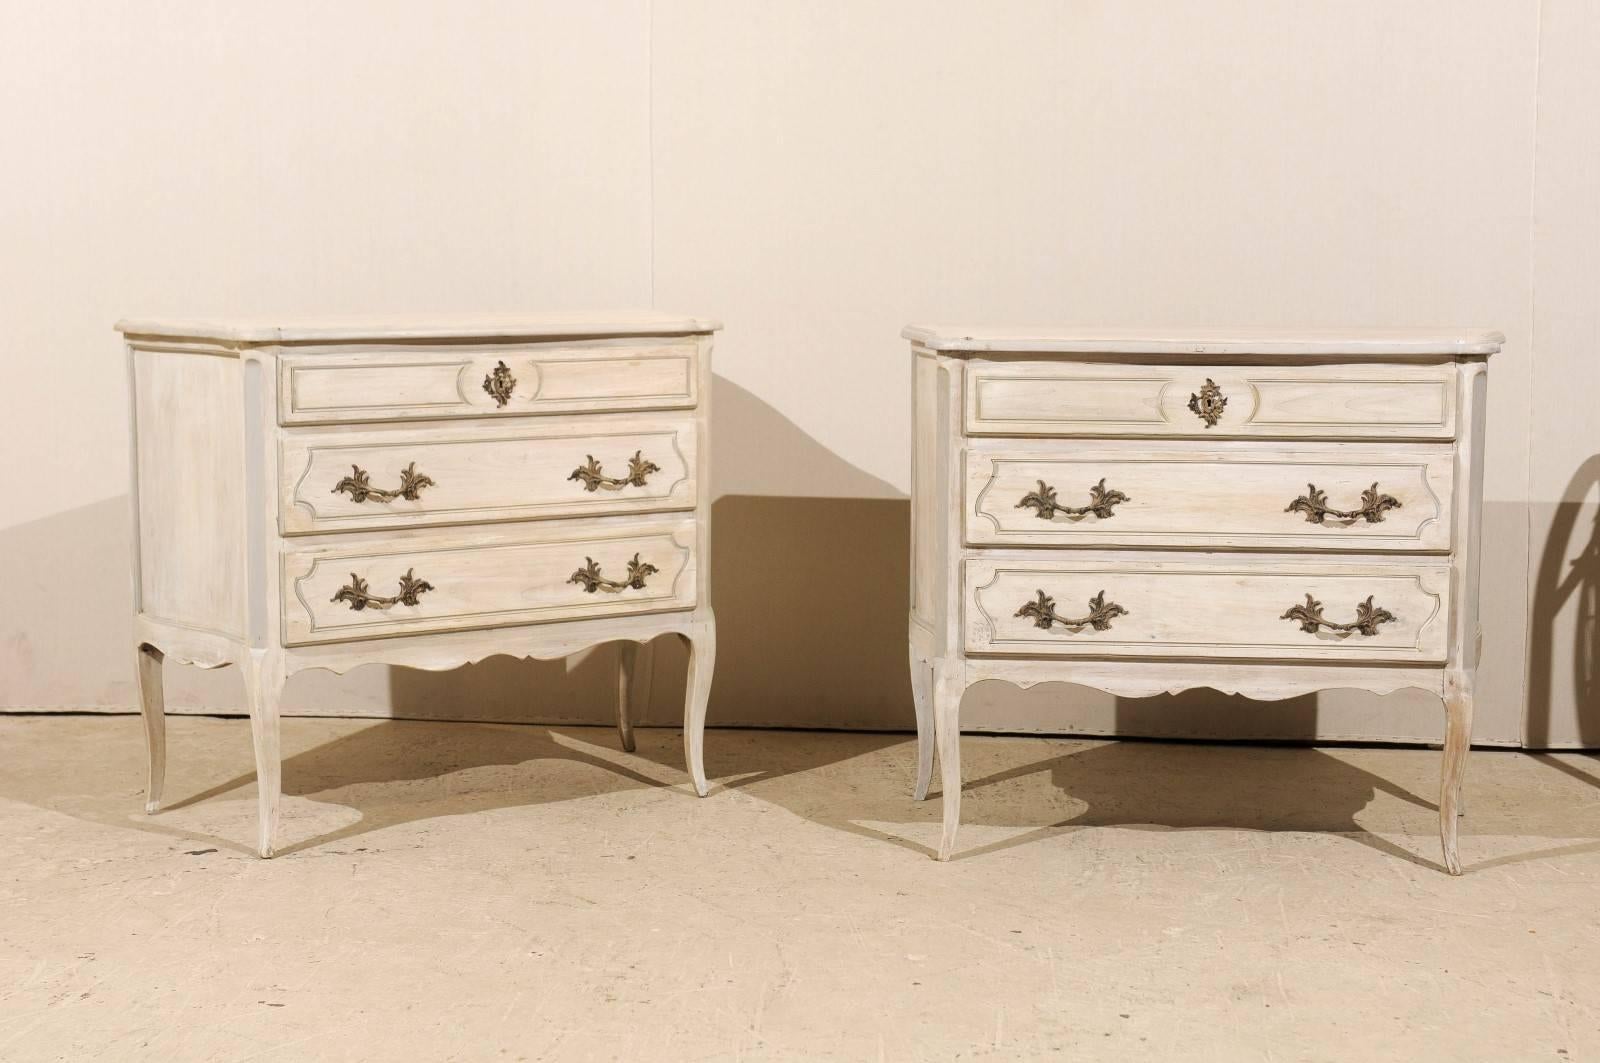 A pair of American vintage three-drawer chests. This pair of painted wood chests features a smaller drawer at the top with Rococo style central escutcheon over two larger drawers. The curvy top, cabriole legs and scalloped skirt on the three sides